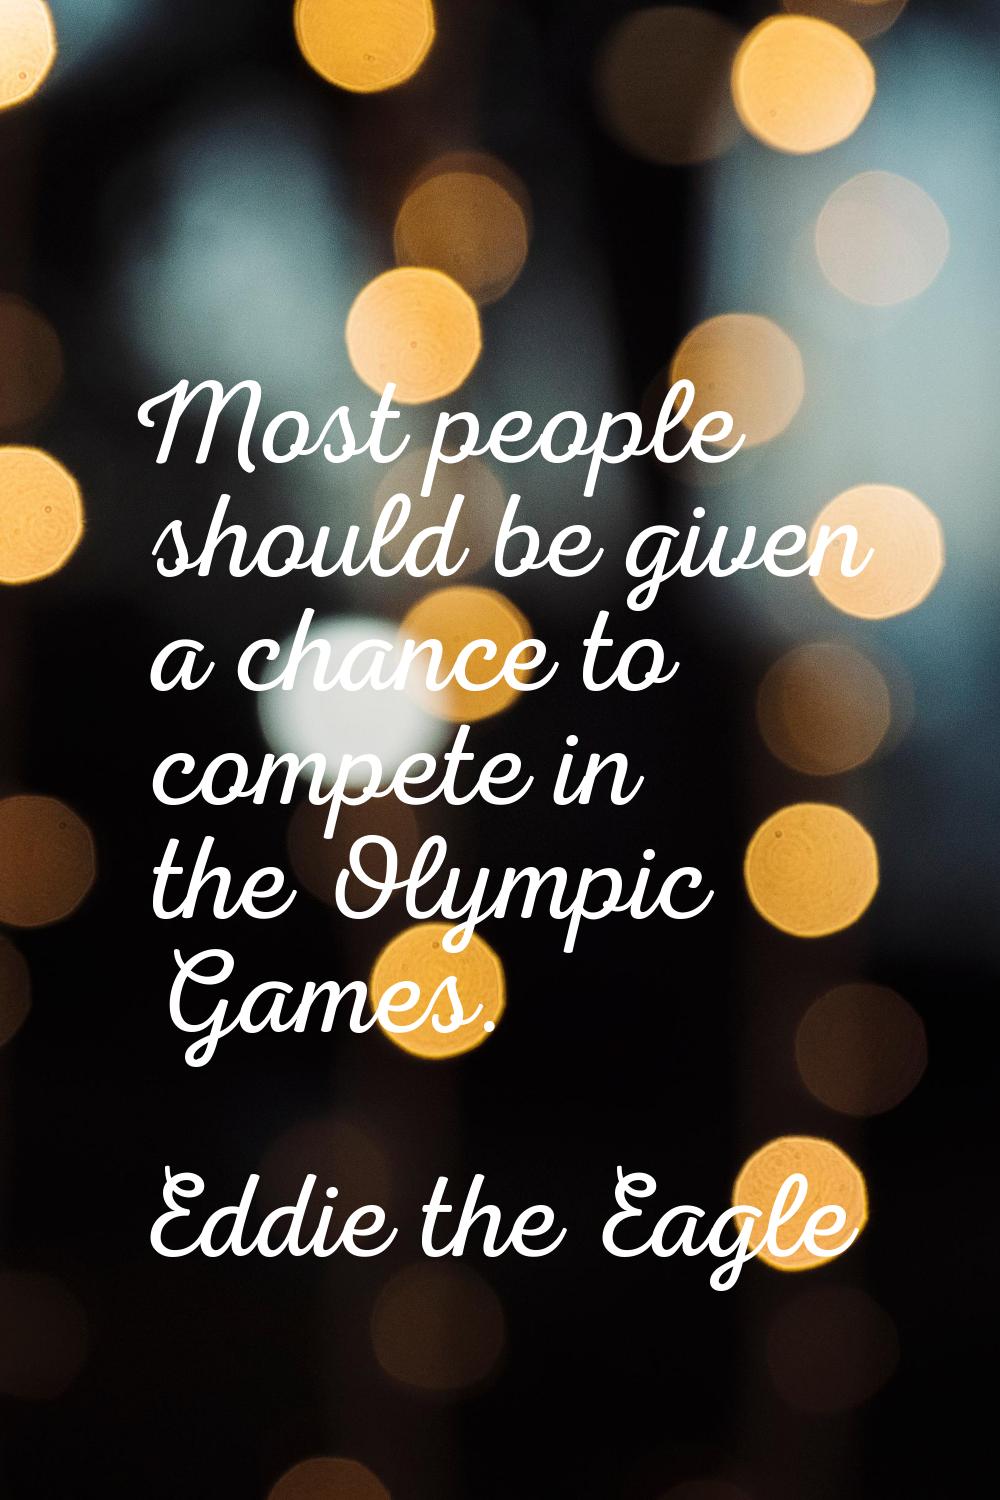 Most people should be given a chance to compete in the Olympic Games.